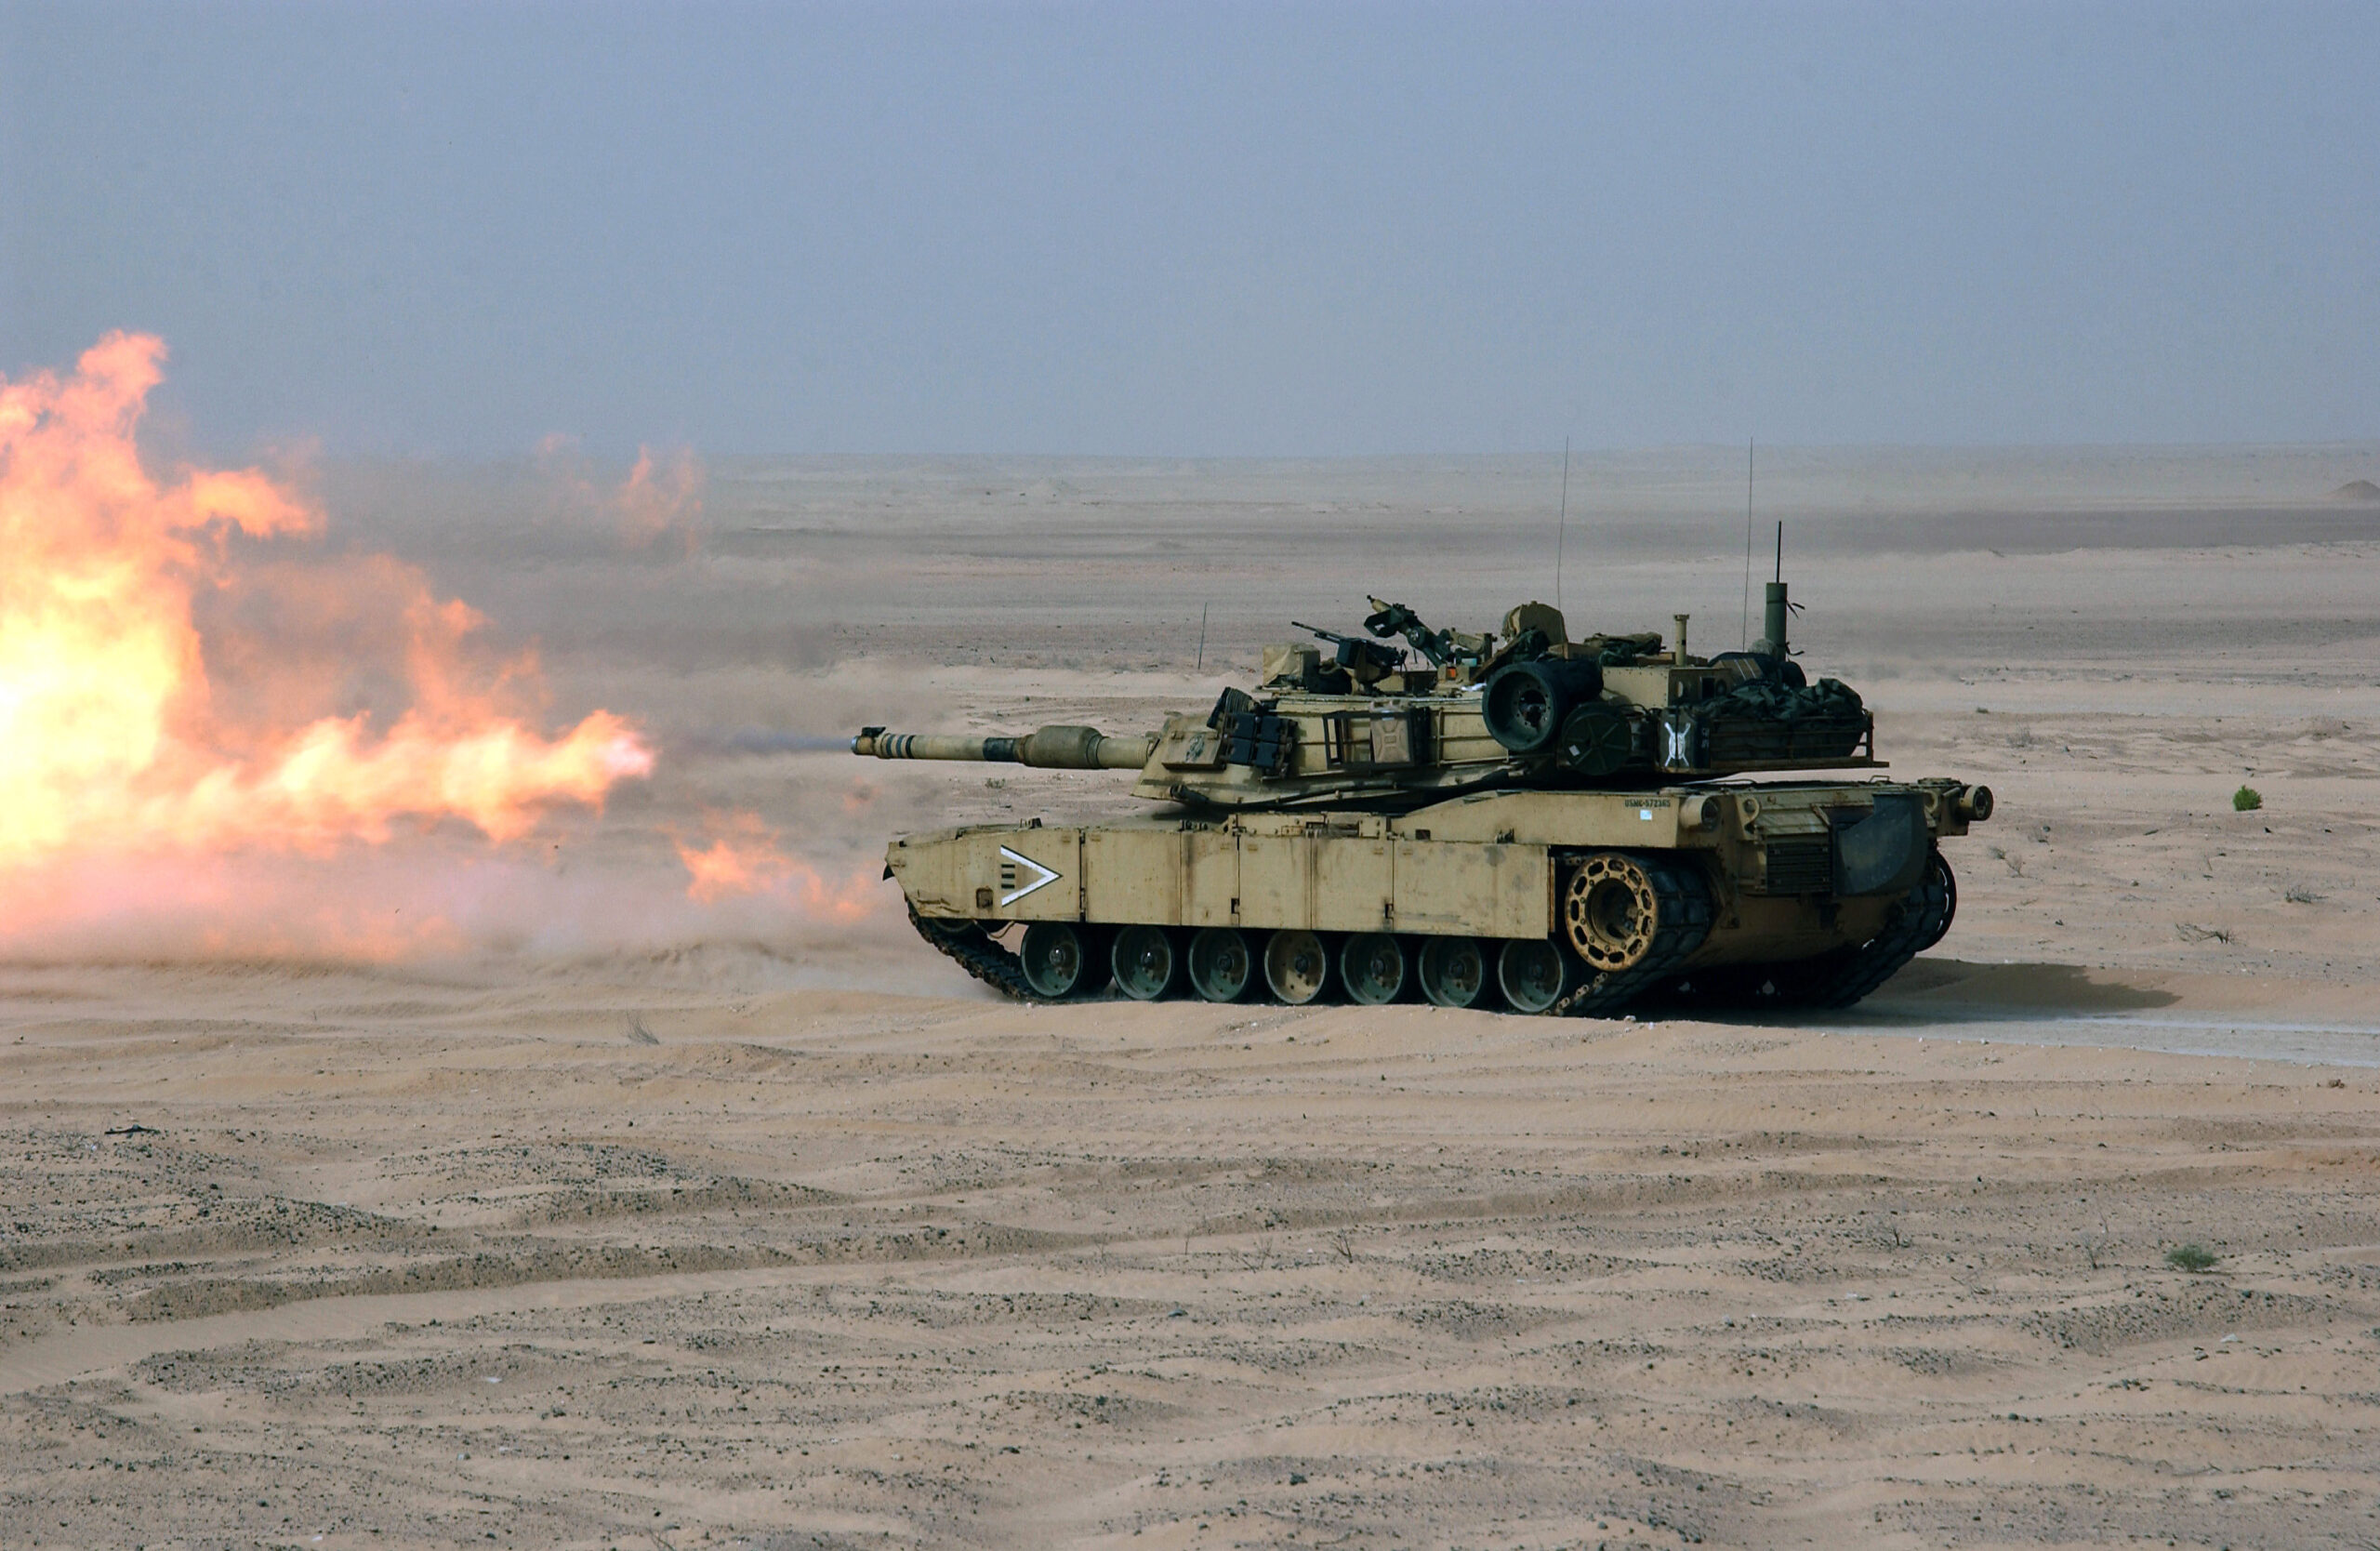 An Abrams M1A1 tank is seen initiating live fire in a desert field. Red-orange flames appear to be coming out of its turret. The tank's hull blends well with the area's dry, sandy environment. The background is a dim blue sky.